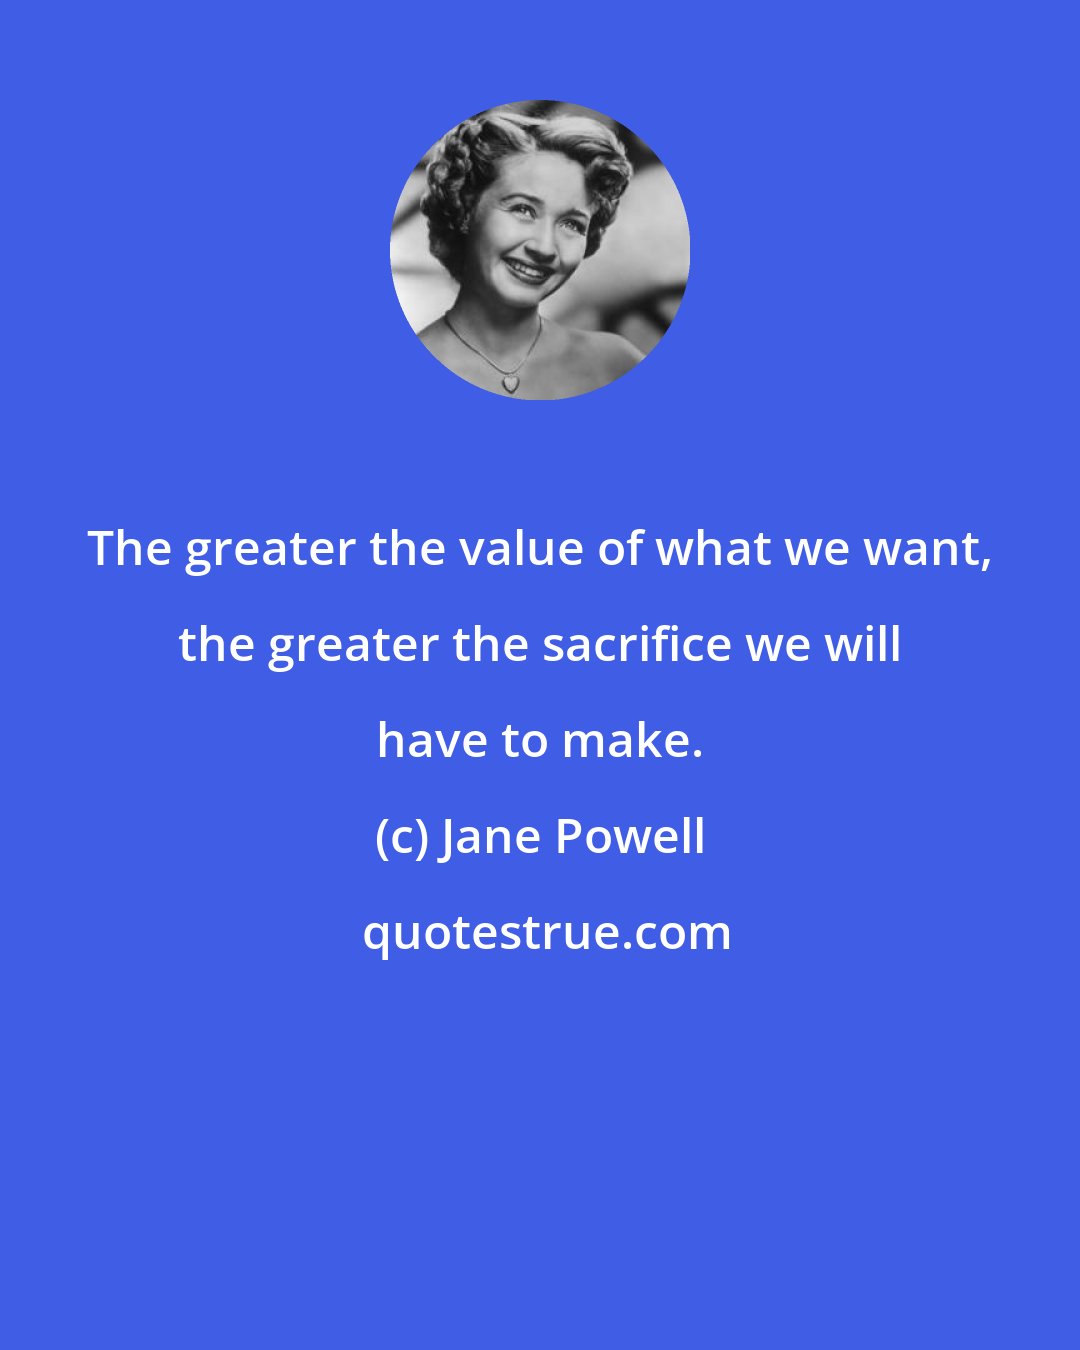 Jane Powell: The greater the value of what we want, the greater the sacrifice we will have to make.